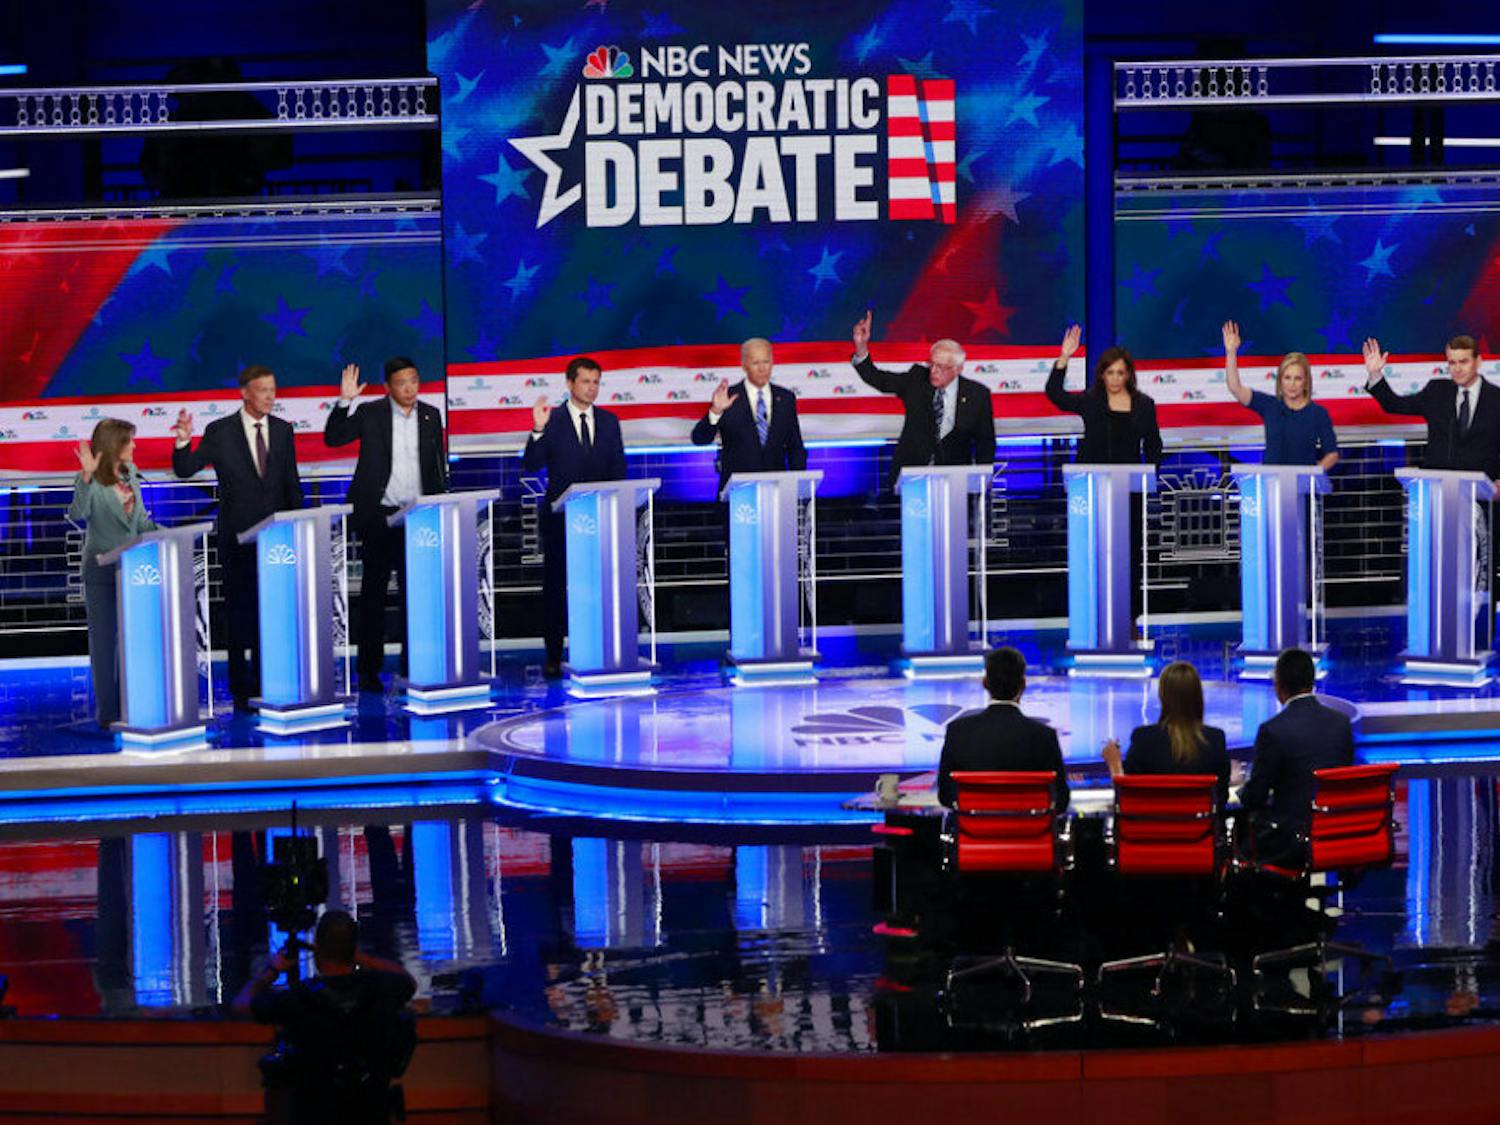 &nbsp;Democratic presidential candidates, author Marianne Williamson, former Colorado Gov. John Hickenlooper, entrepreneur Andrew Yang, South Bend Mayor Pete Buttigieg, former Vice President Joe Biden, Sen. Bernie Sanders, I-Vt., Sen. Kamala Harris, D-Calif., Sen. Kirsten Gillibrand, D-N.Y., Colorado Sen. Michael Bennet, and Rep. Eric Swalwell, D-Calif., raise their hands when asked if they would provide healthcare for undocumented immigrants, during the Democratic primary debate hosted by NBC News at the Adrienne Arsht Center for the Performing Arts, Thursday, June 27, 2019, in Miami.&nbsp;